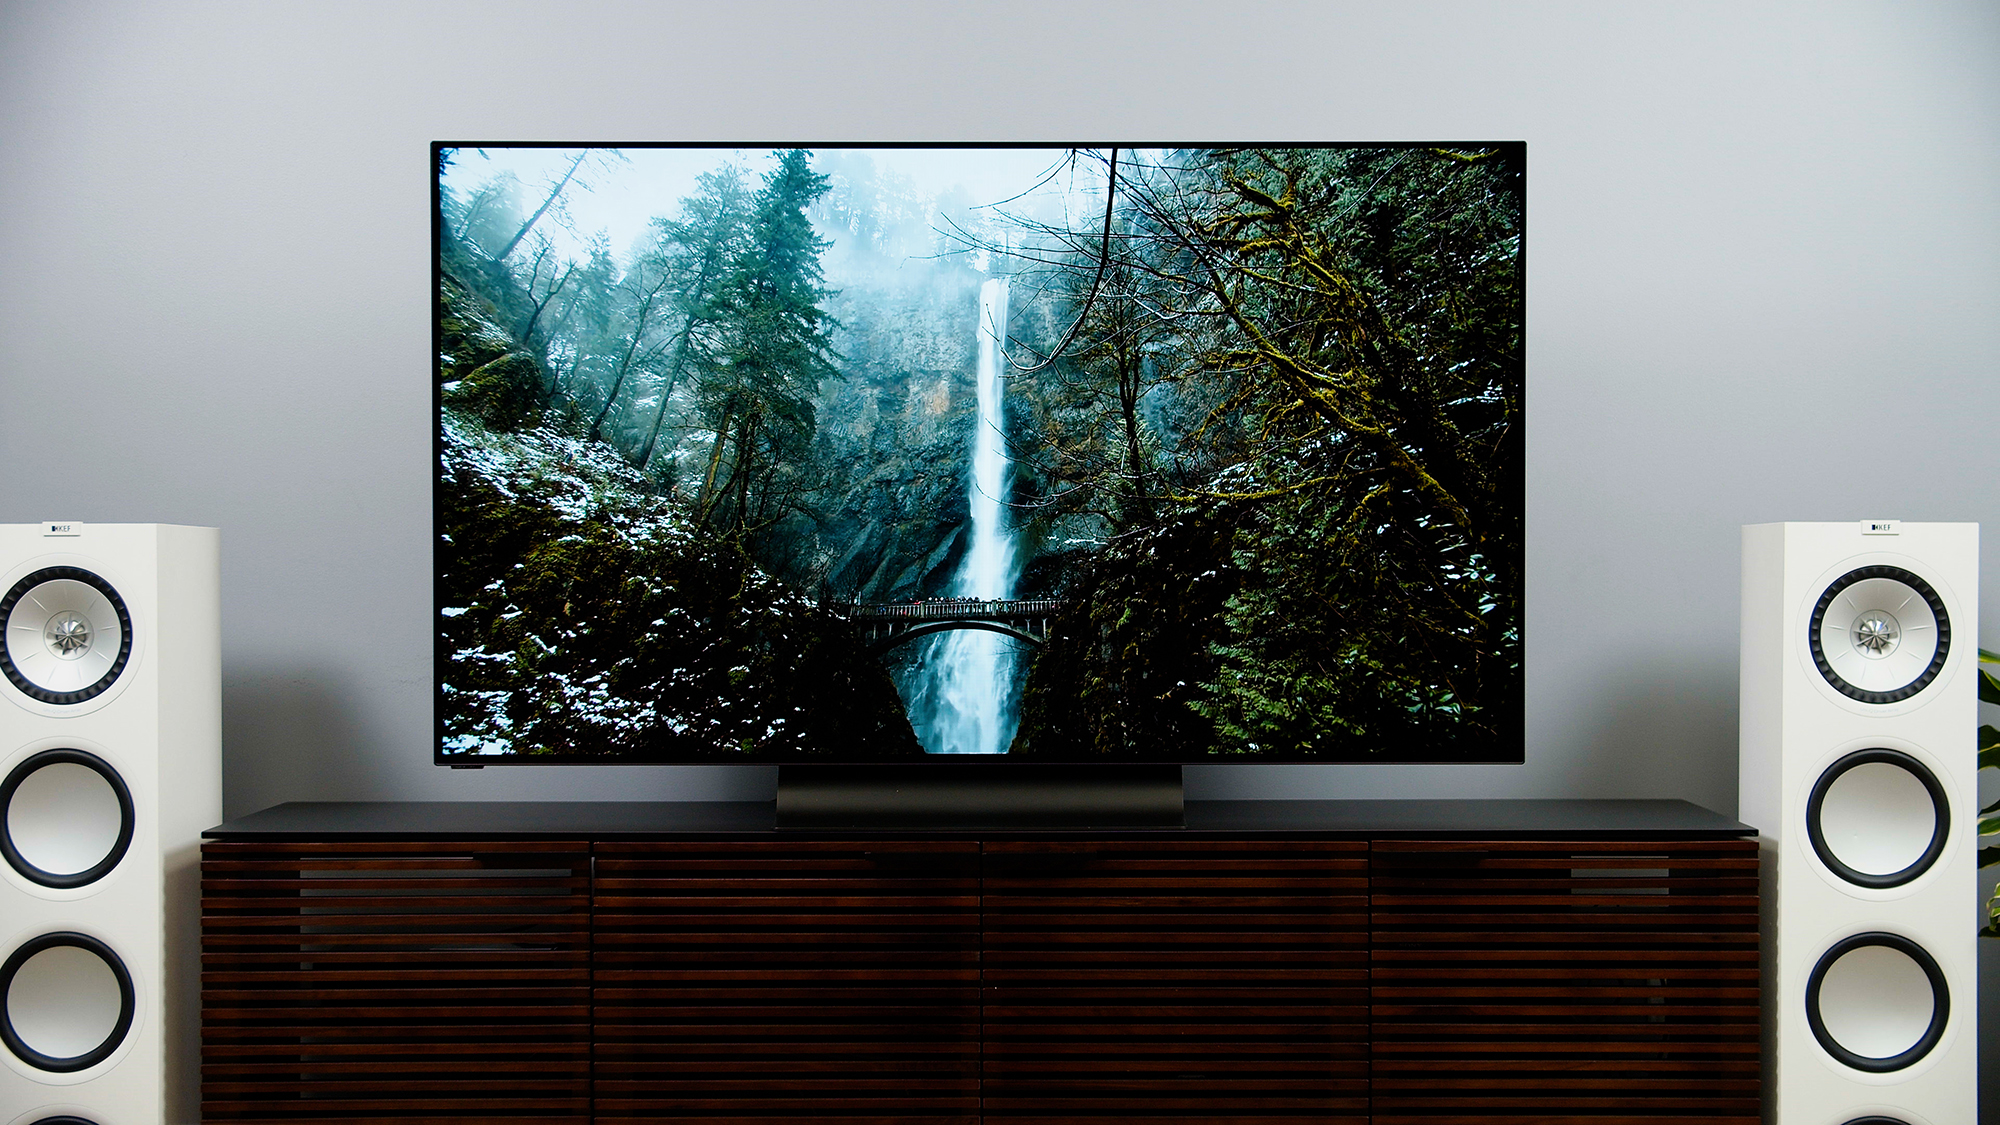 How to watch Super Bowl 2022 on a Vizio TV | Digital Trends